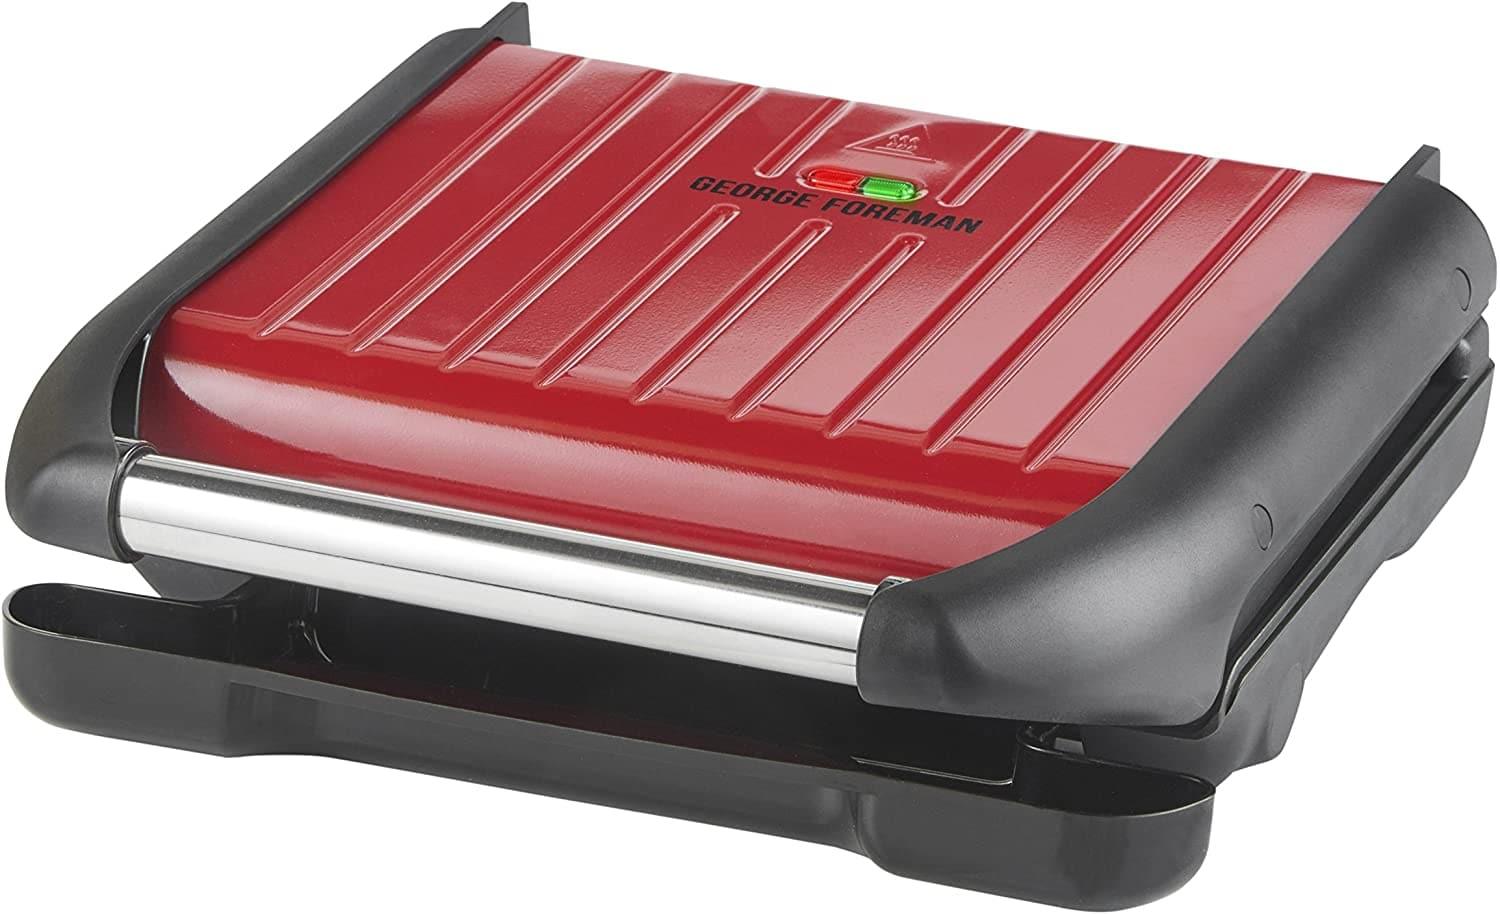 George Foreman Large Steel Grill Family, Red 1850W - 25050